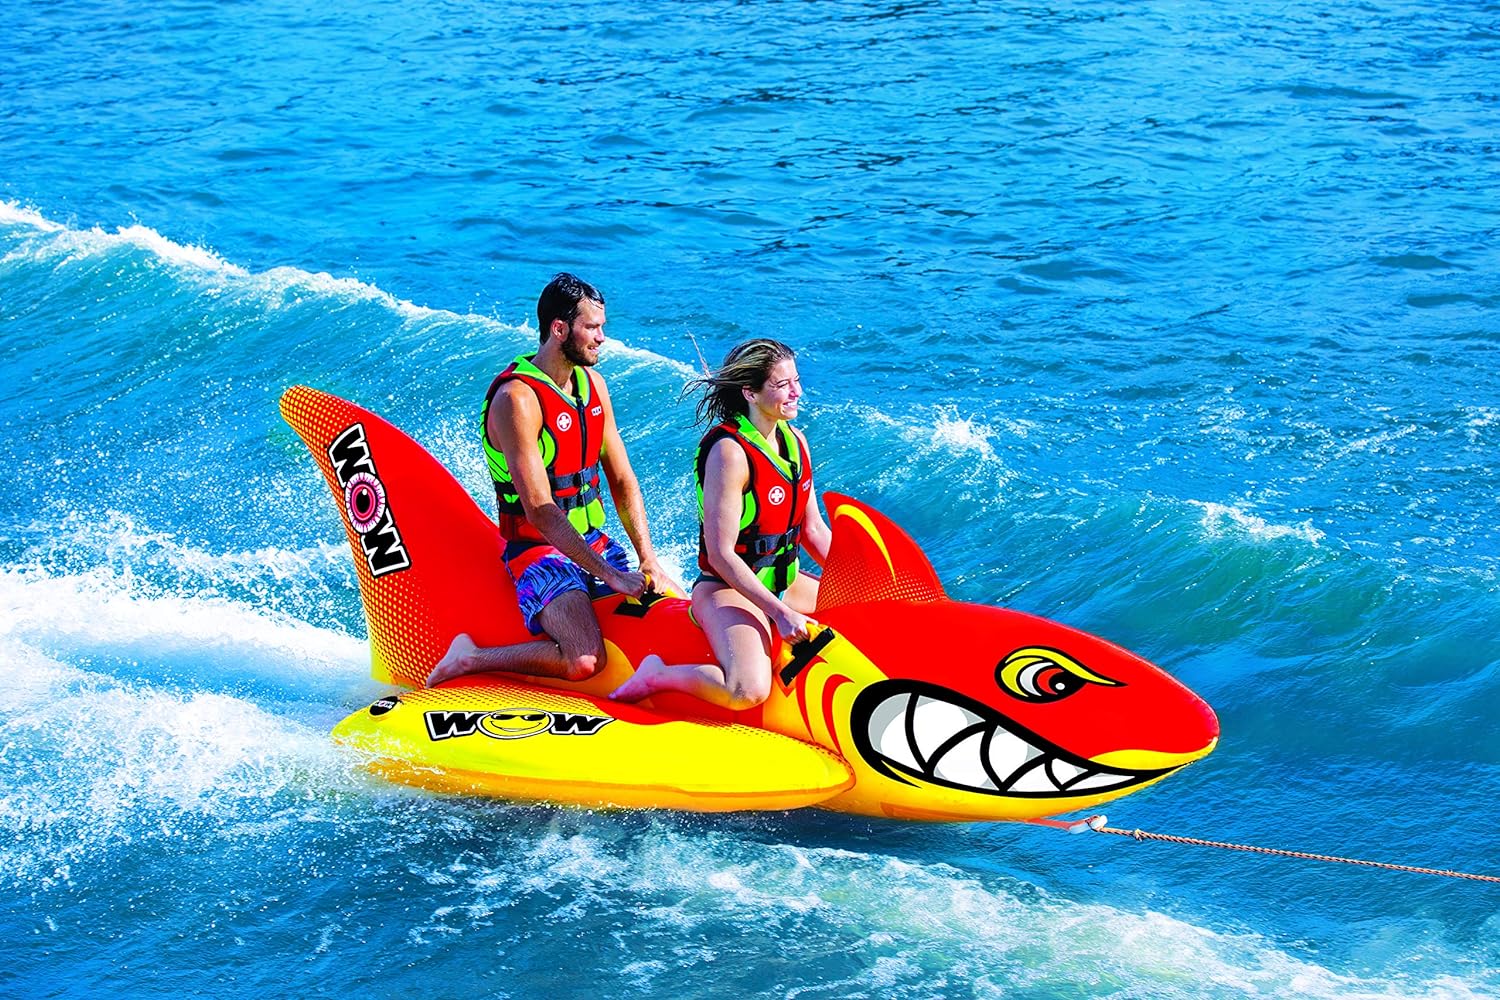 WOW Sports Wow World of Watersports Big Shark 1 or 2 Person Towable Tube for Boating, 20-1040